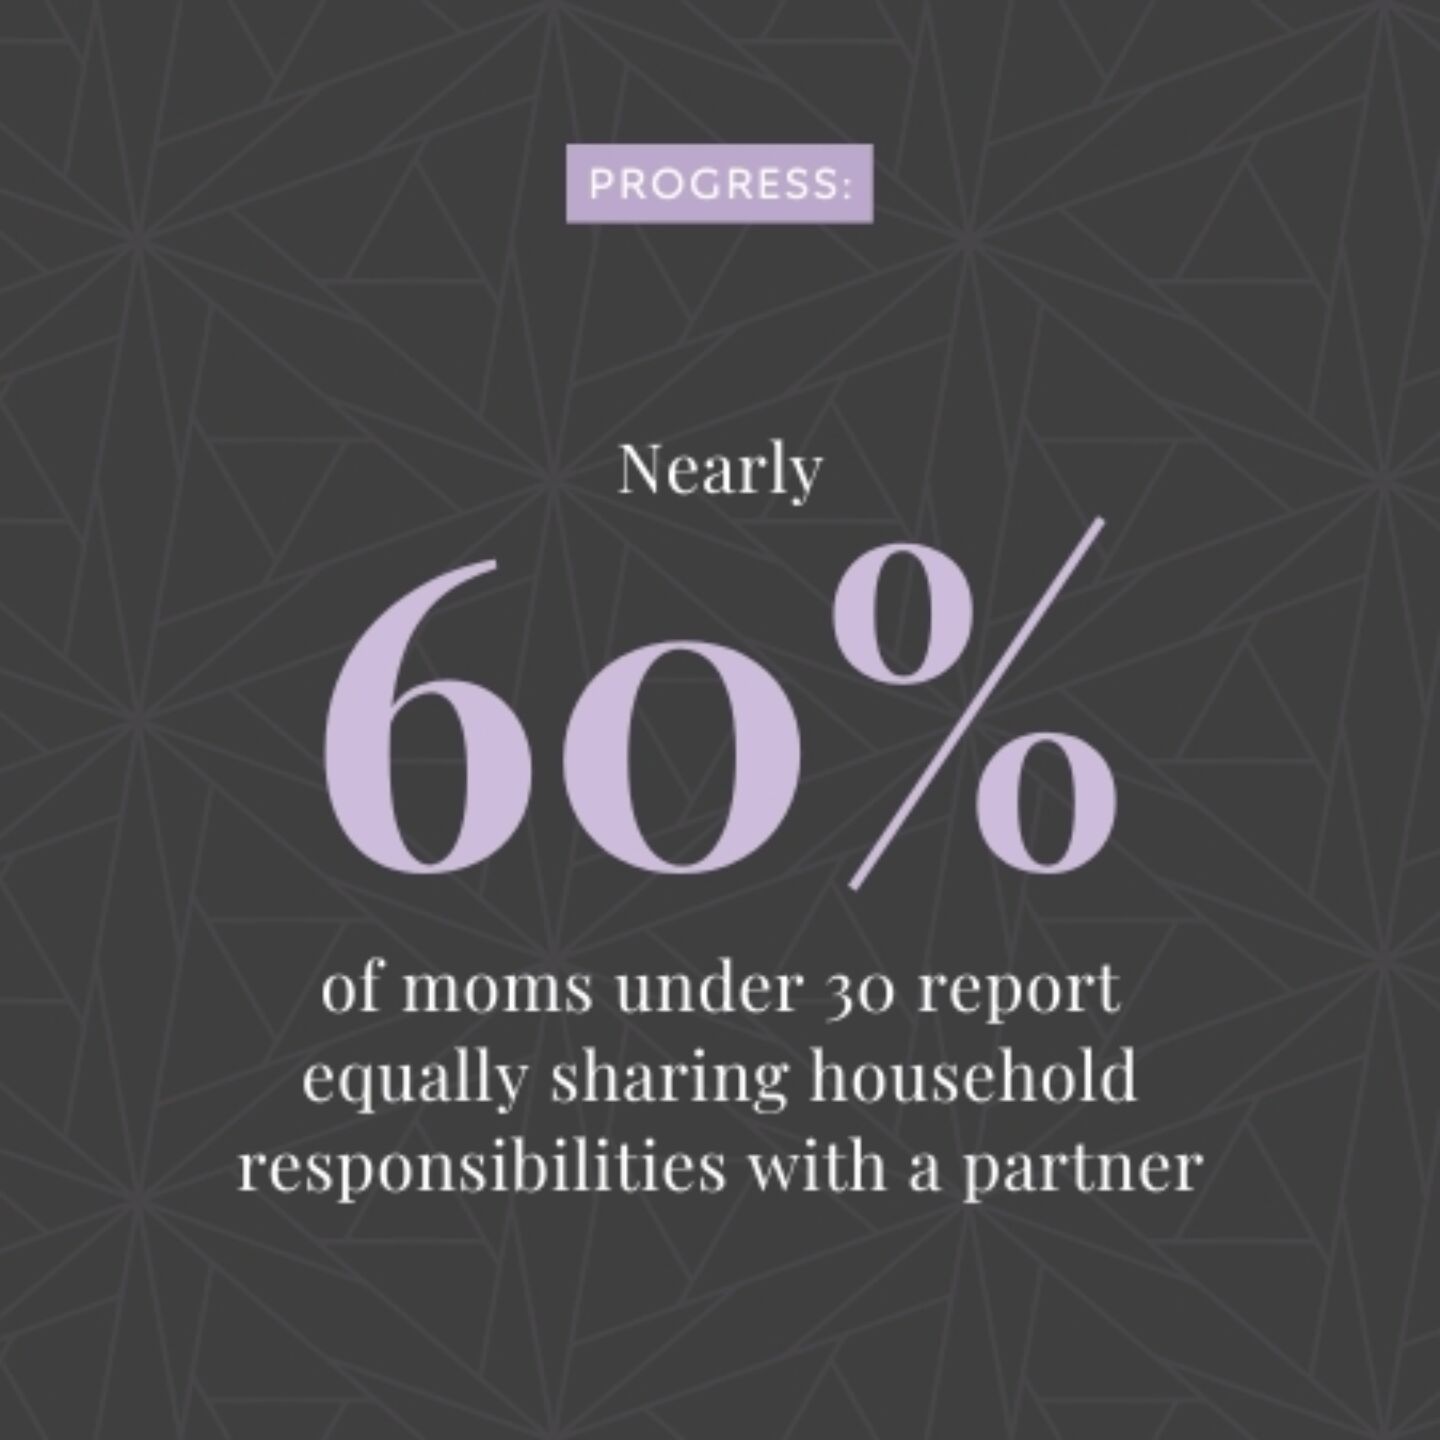 Nearly 60% of moms under 30 report equally sharing household responsibilities with a partner vs. 35% of moms over 30 - state of motherhood